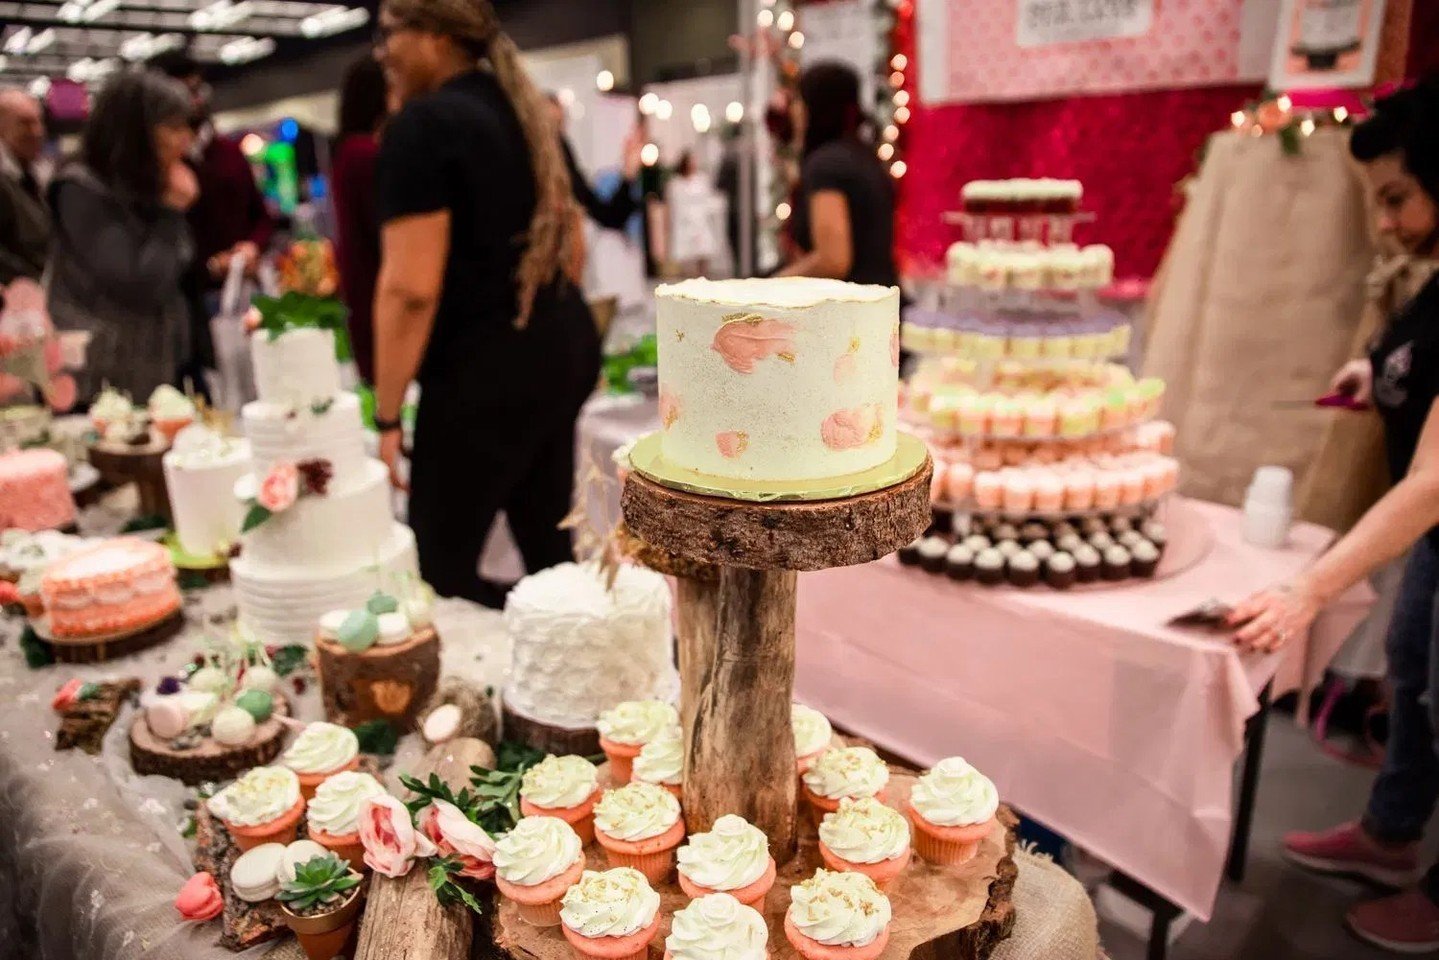 🧁✨ Feast your eyes on the mouthwatering creations of @newyorkcupcakes, beautifully captured by Elizabeth Crook from @seattlerefined! 

Their delectable samples were a crowd favorite at this year's show! 🍰😋